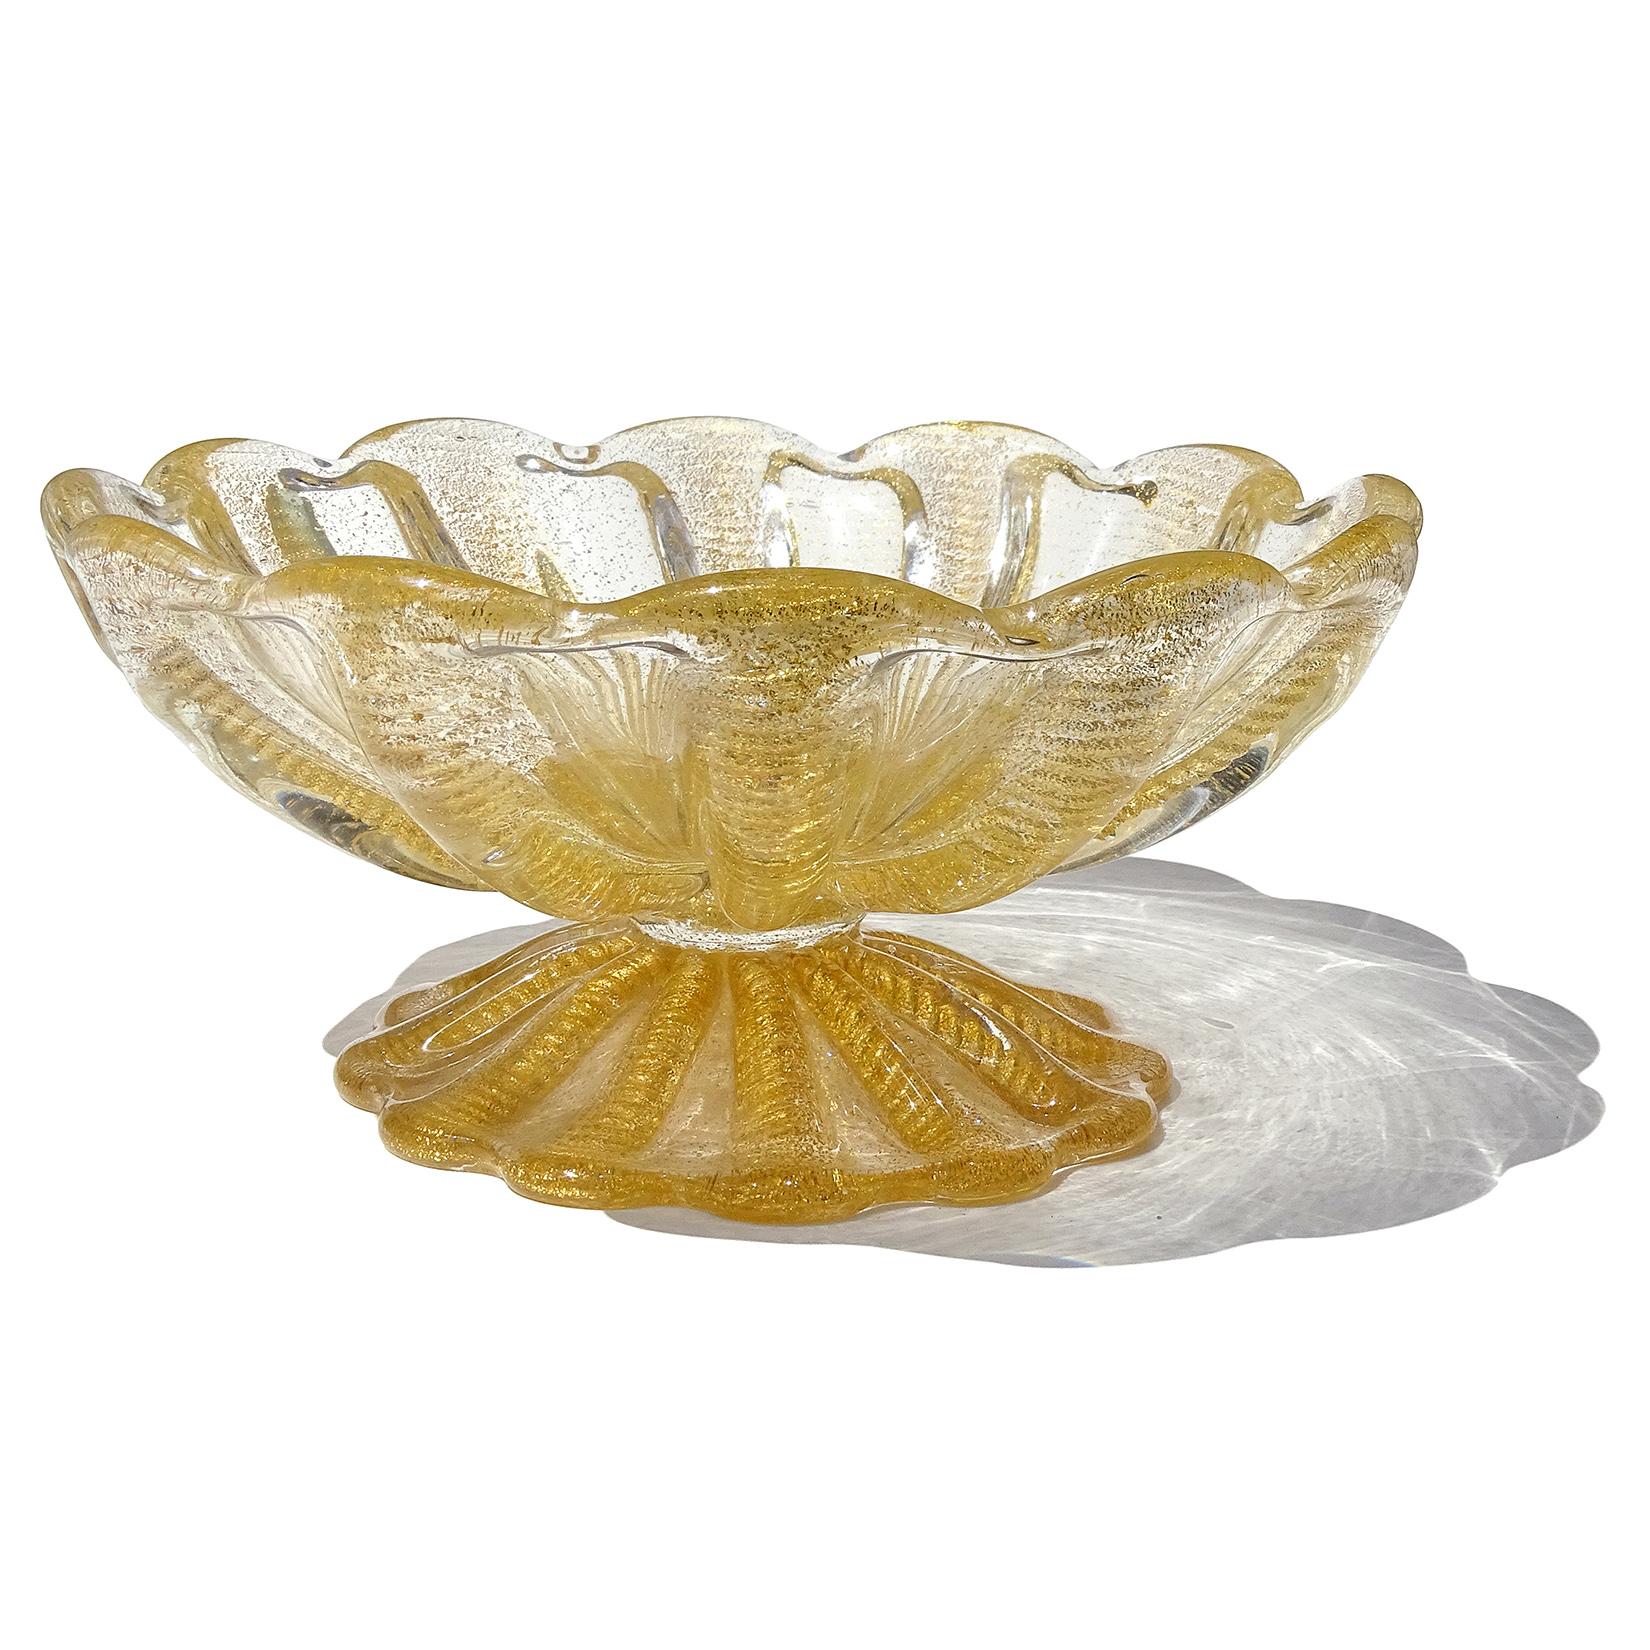 Beautiful vintage Murano hand blown gold flecks Italian art glass footed compote bowl. Documented to designer Ercole Barovier for Barovier e Toso. The piece has a ribbed design with ropes of gold, 